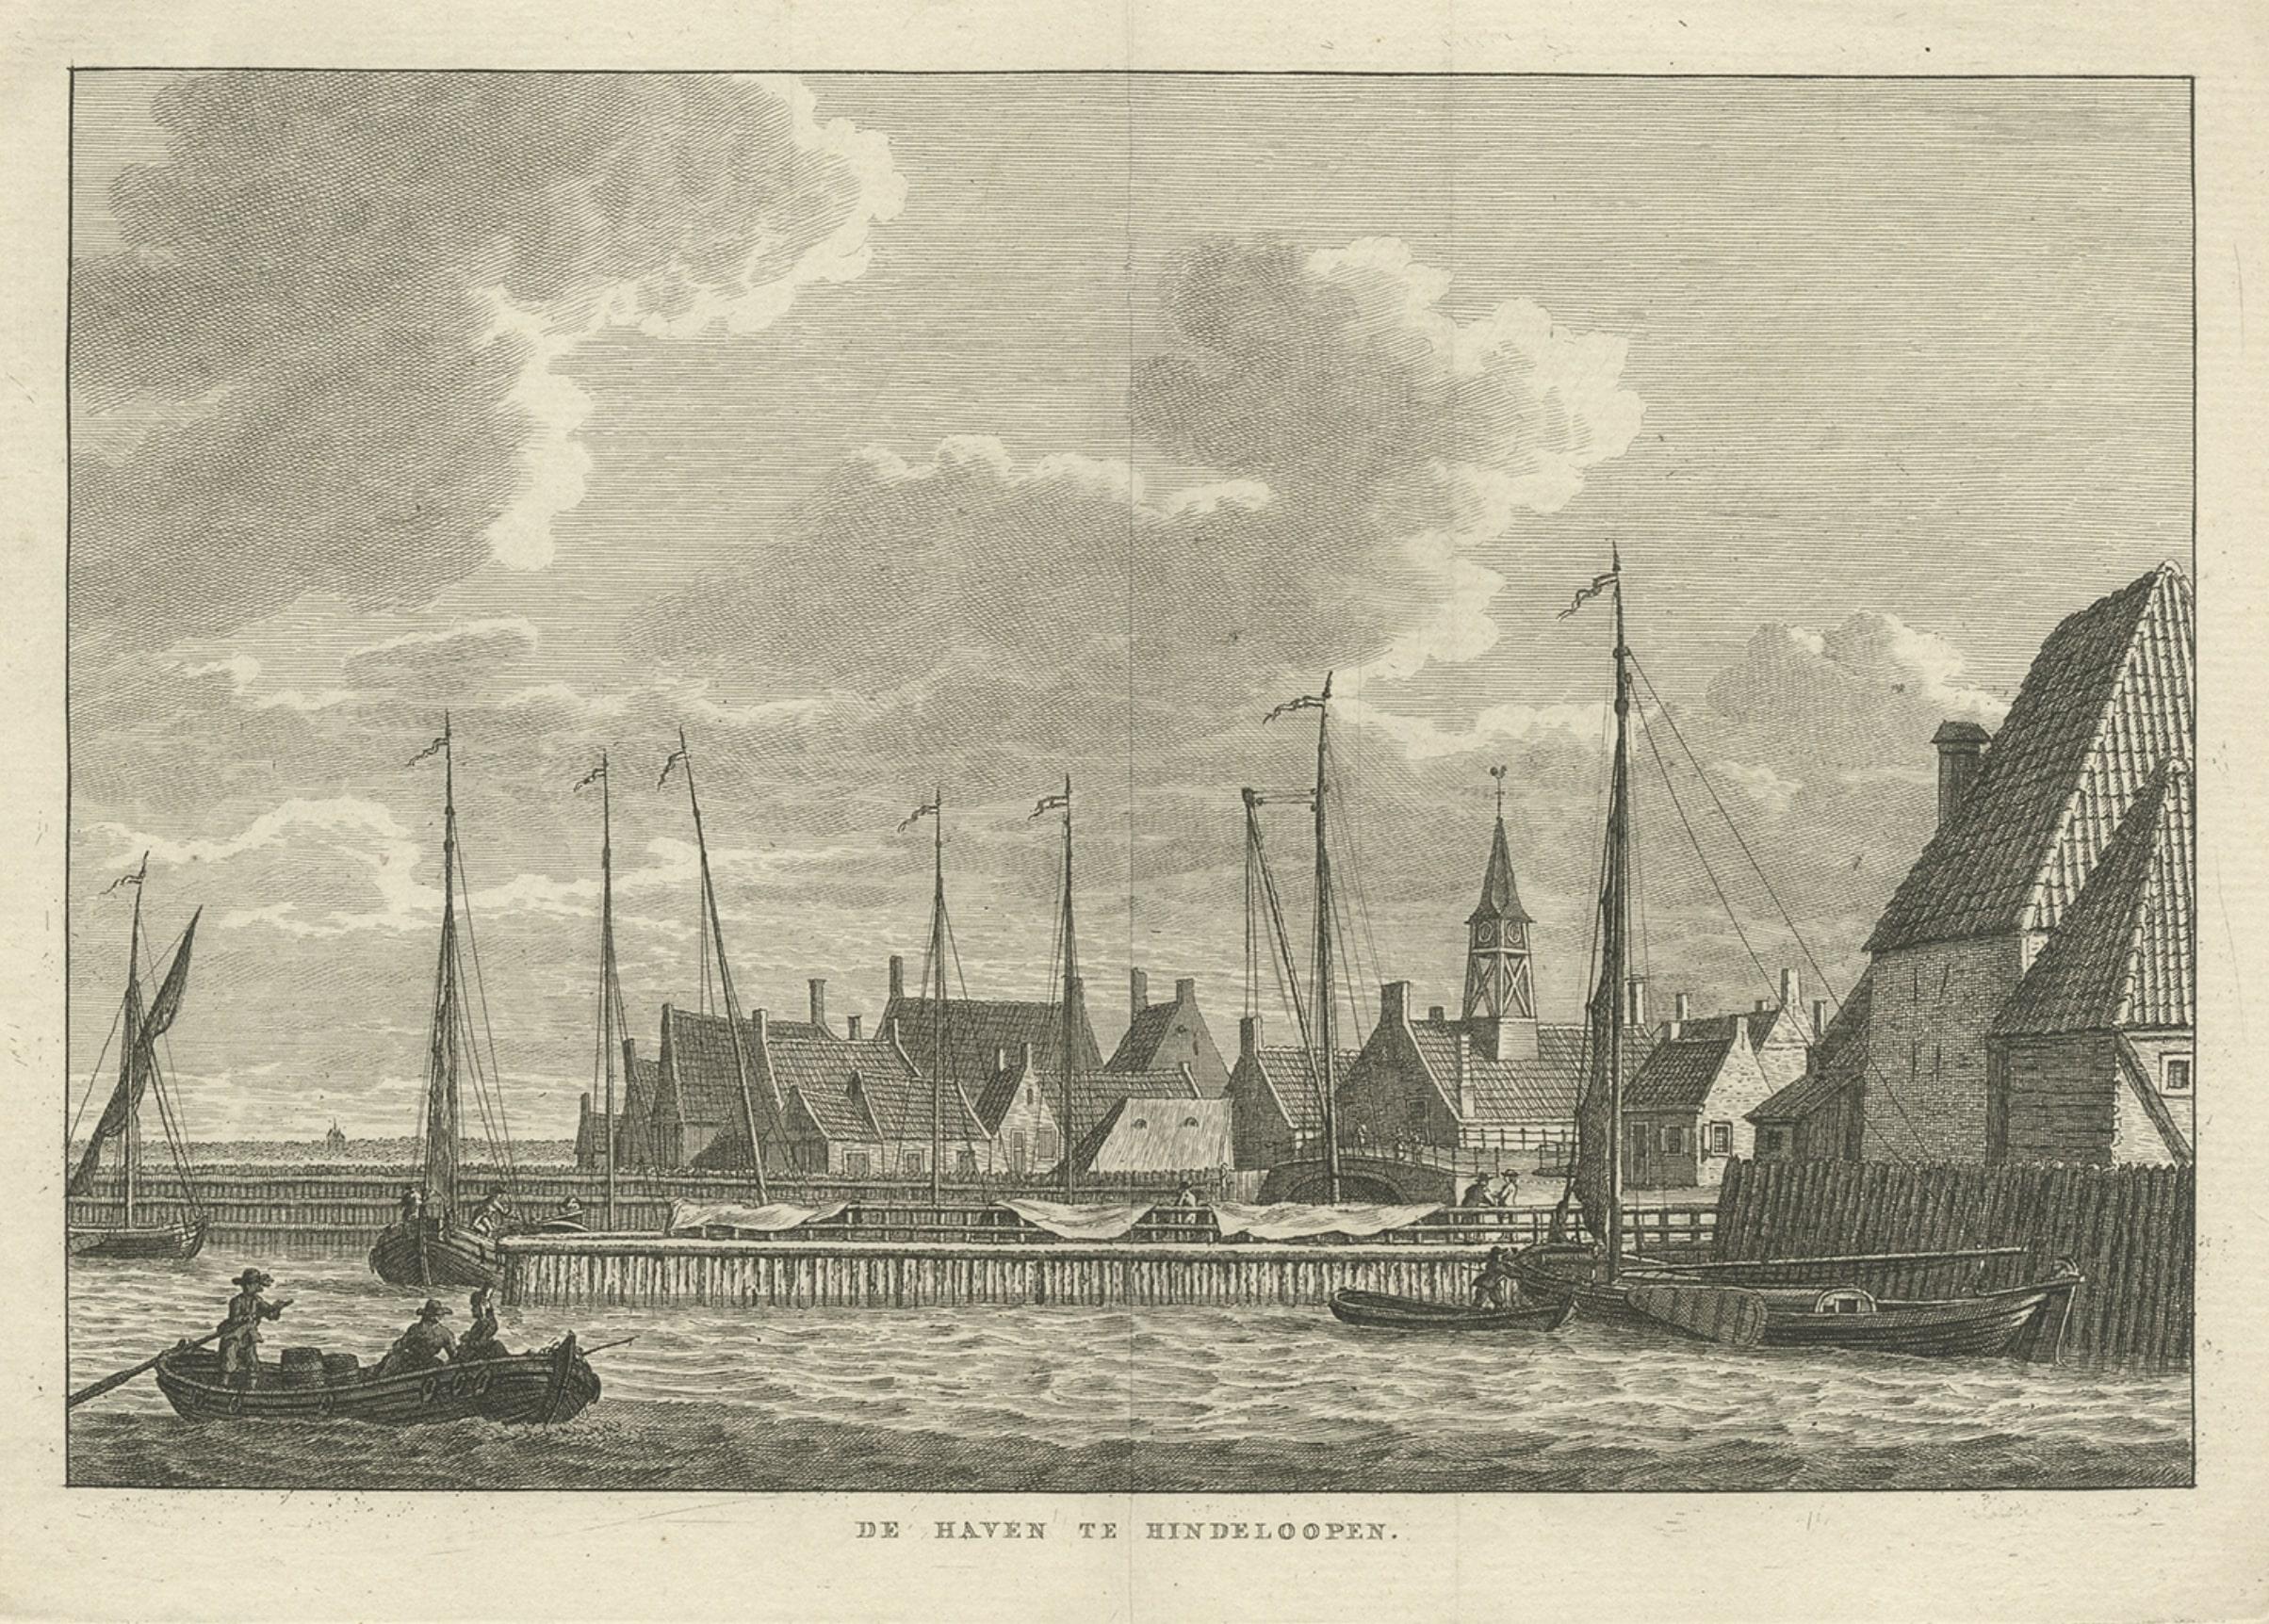 Paper Antique Print of the Frisian City of Hindelopen in The Netherlands, 1793 For Sale